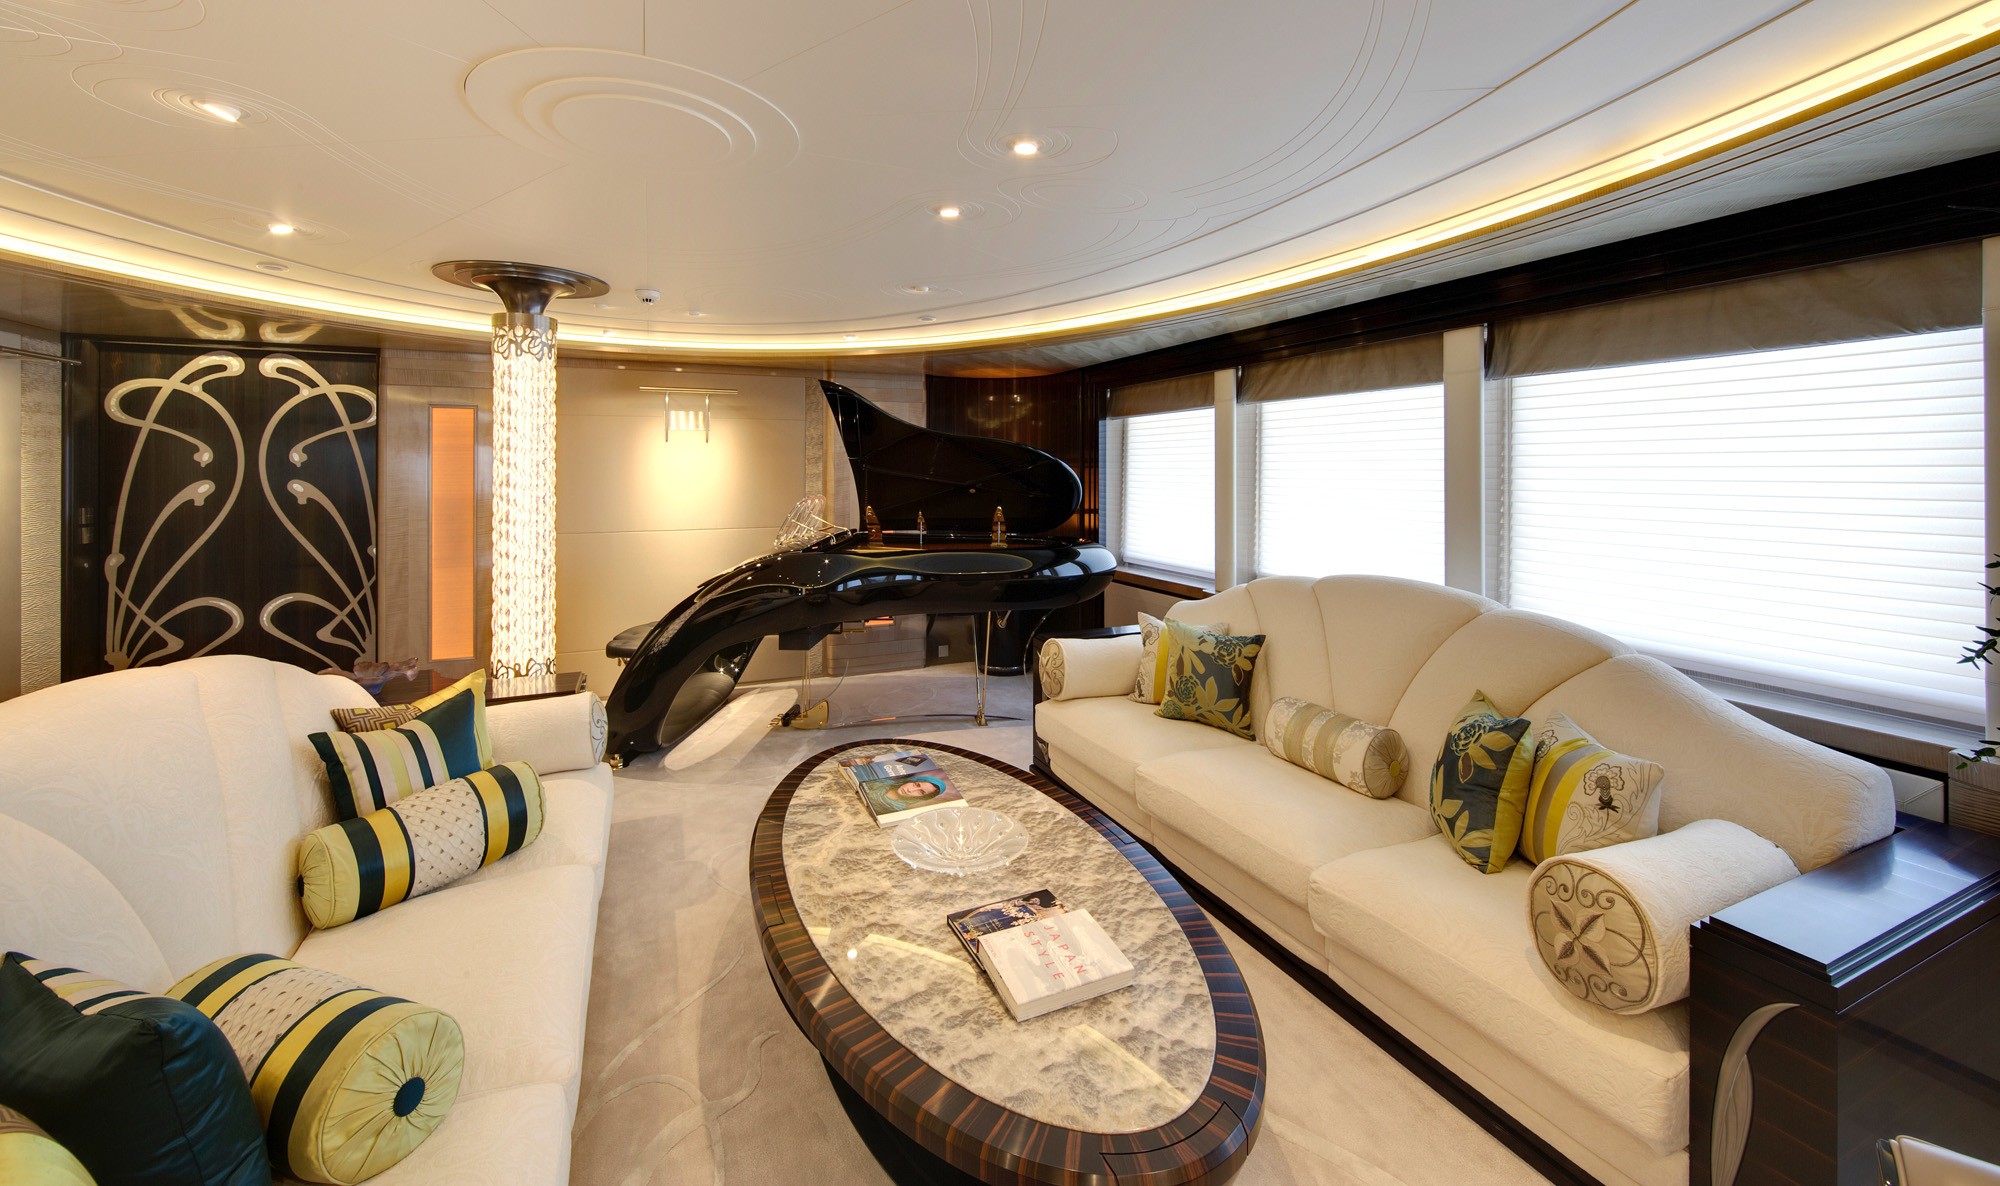 Piano room with comfortable sofas